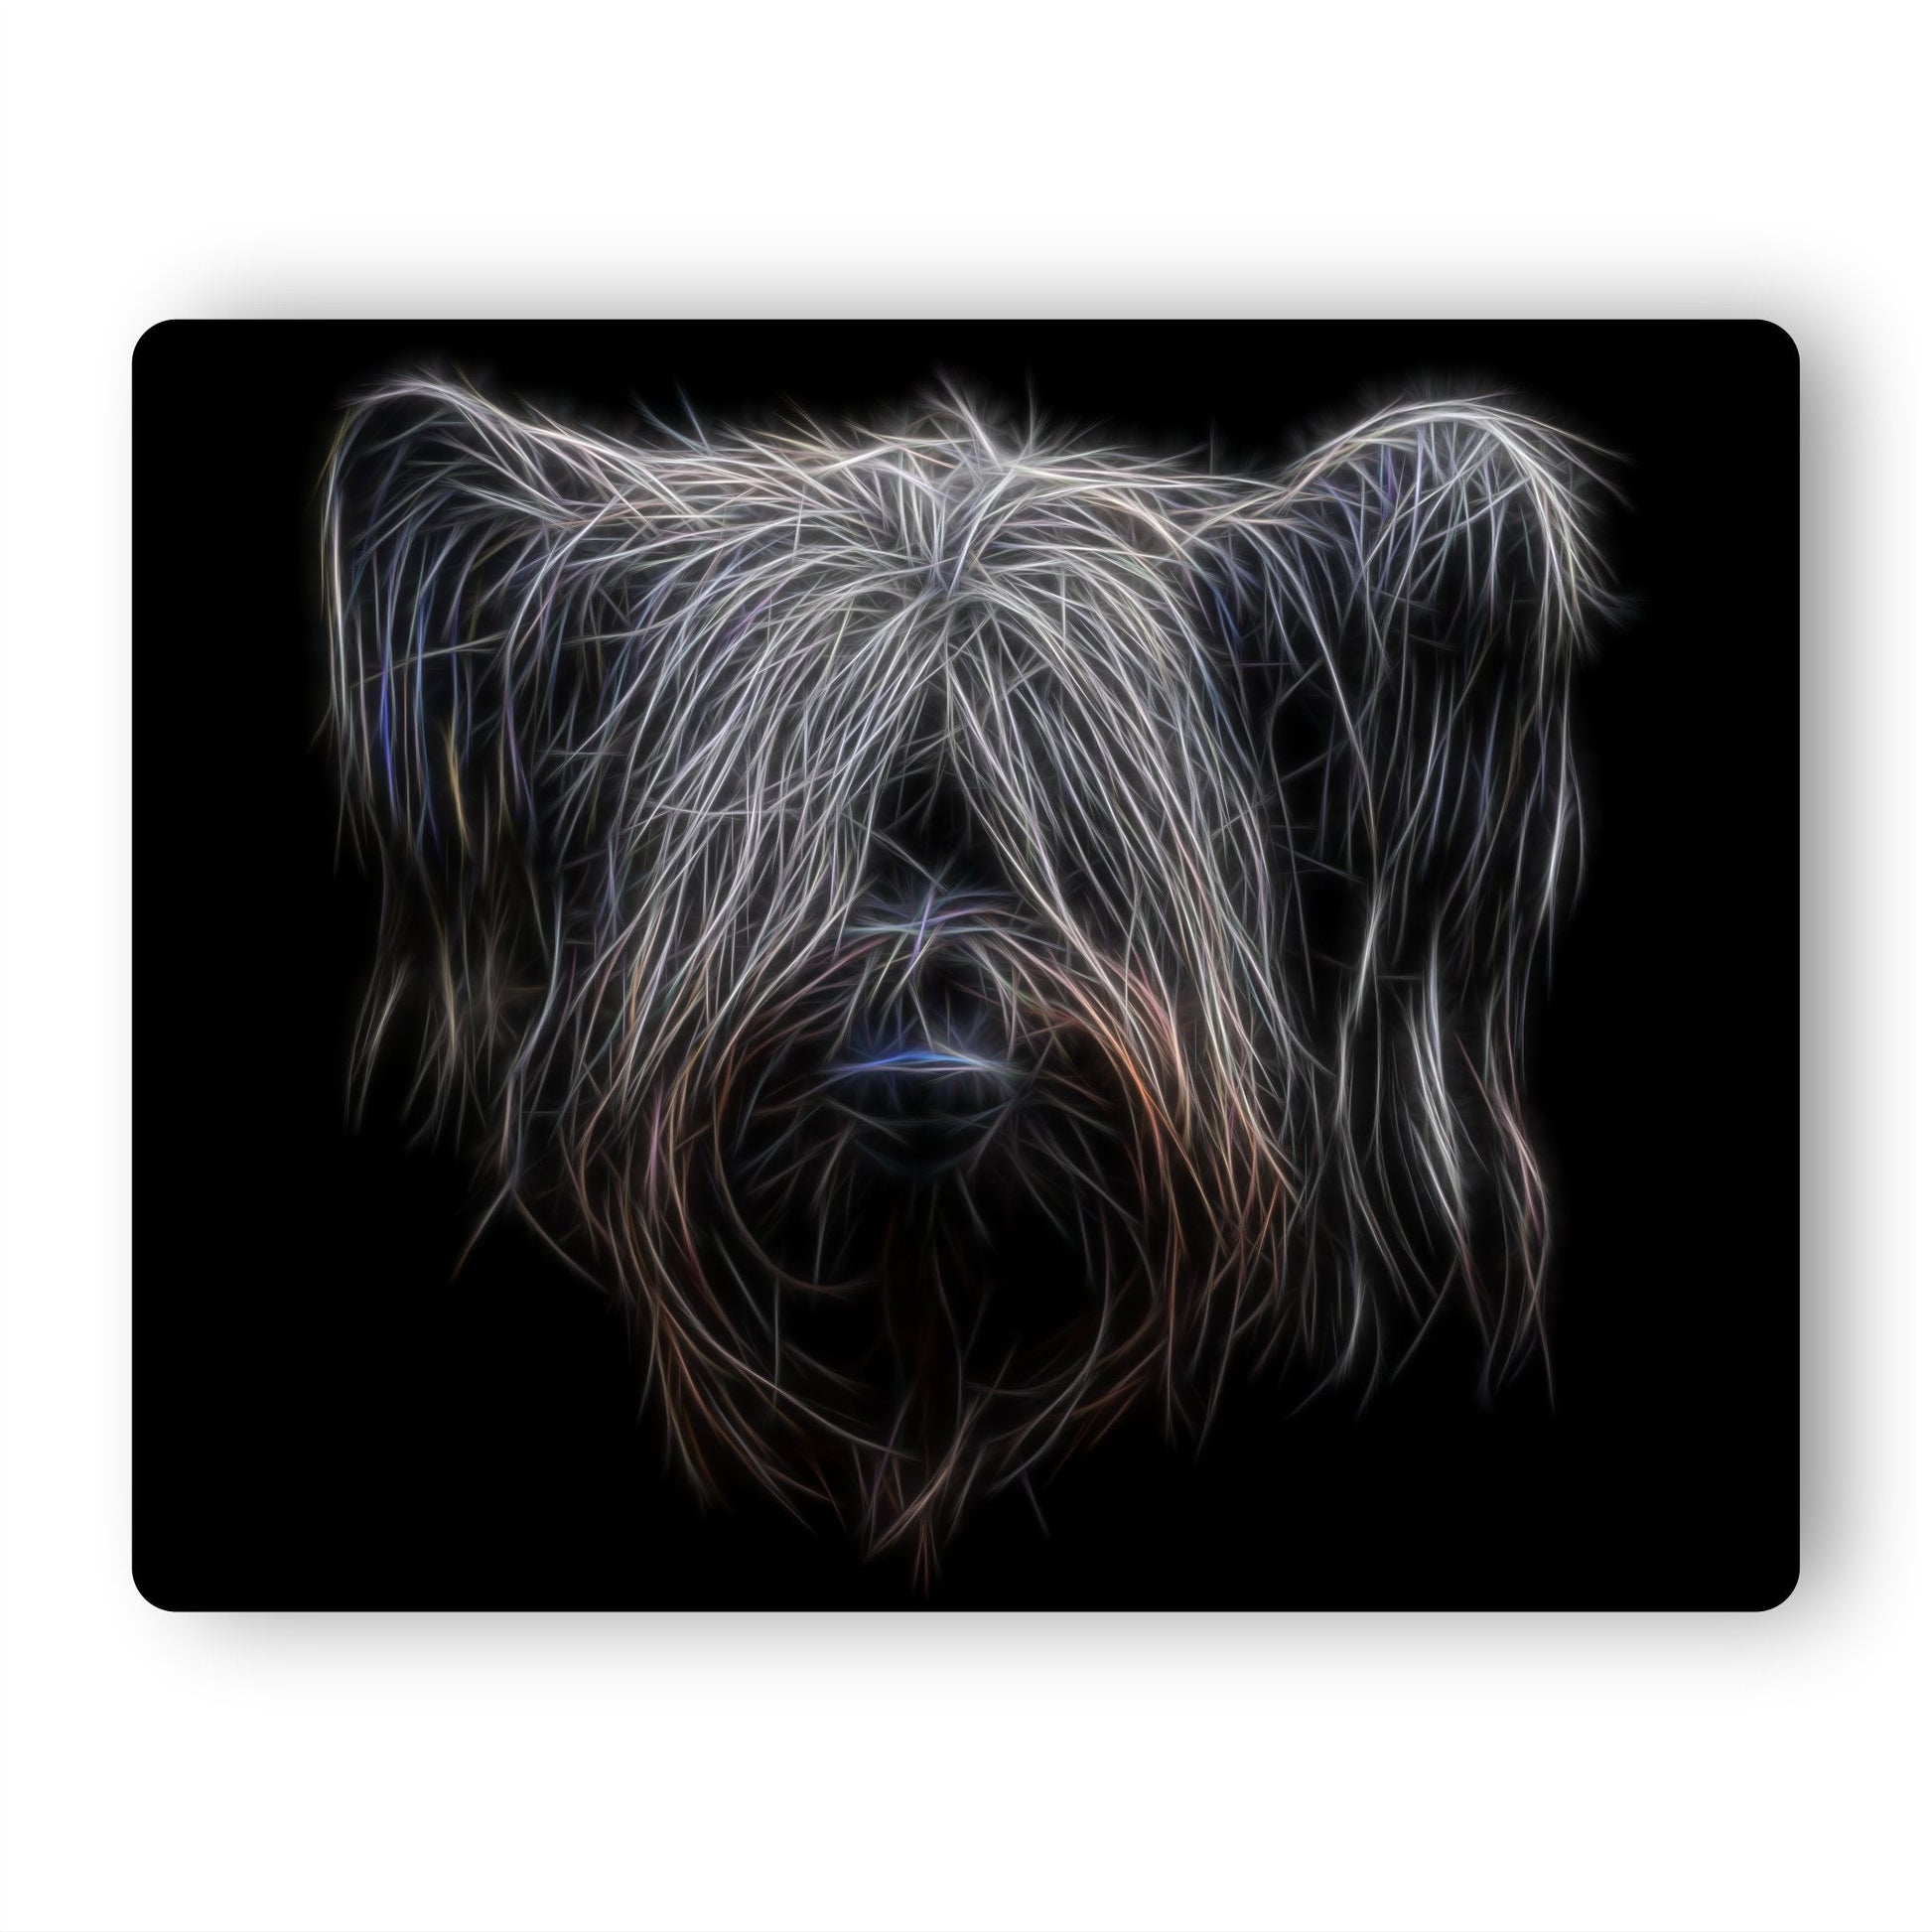 Skye Terrier Metal Wall Plaque with Stunning Fractal Art Design,  Perfect Skye Terrier Owner or Dog Lover Gift.